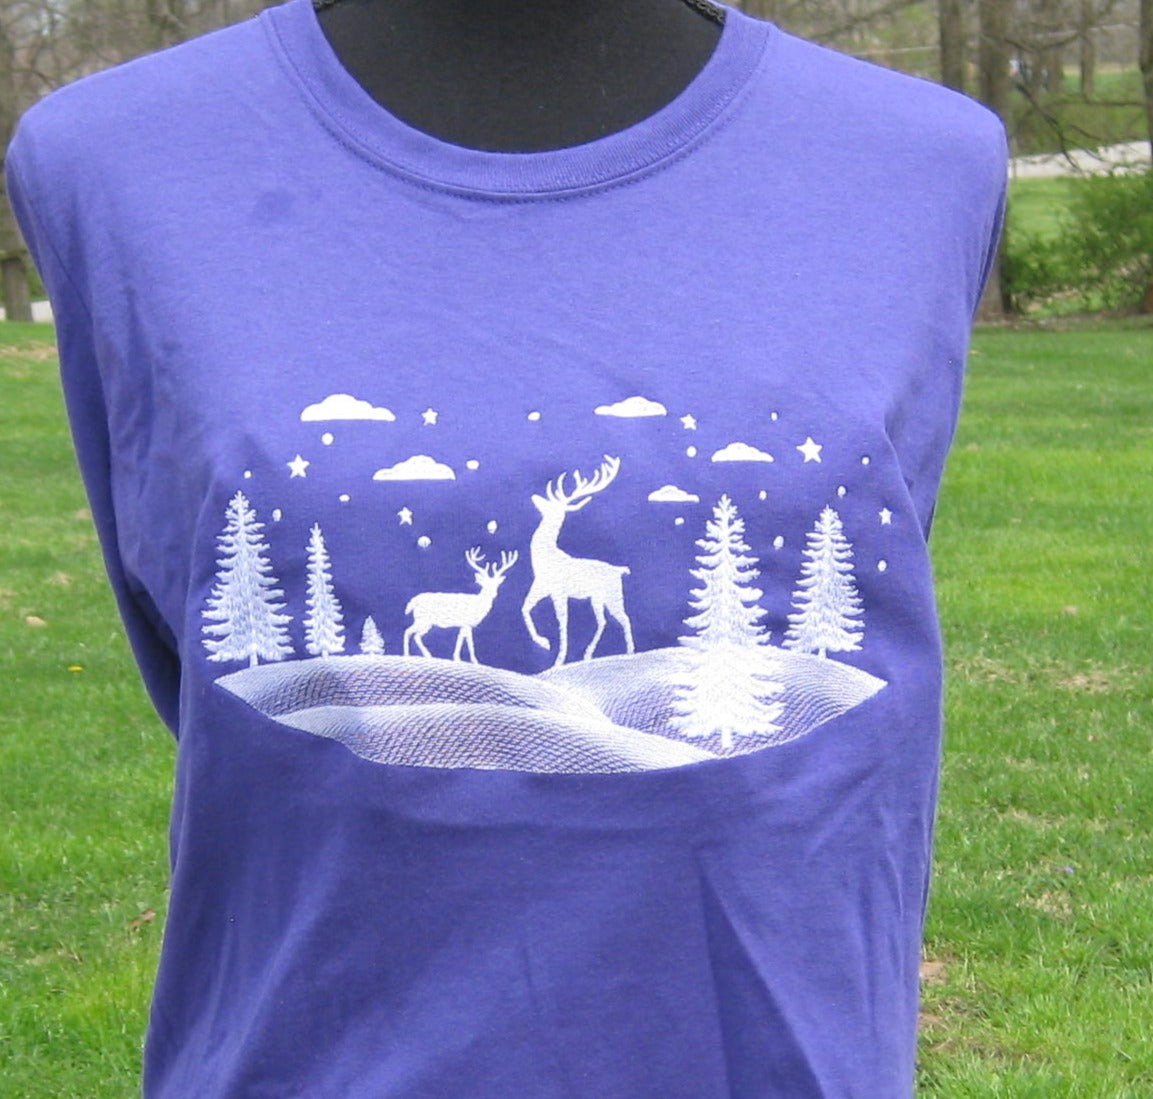 Winter Deer Scene long sleeve t-shirt – Stitched with Family Ties